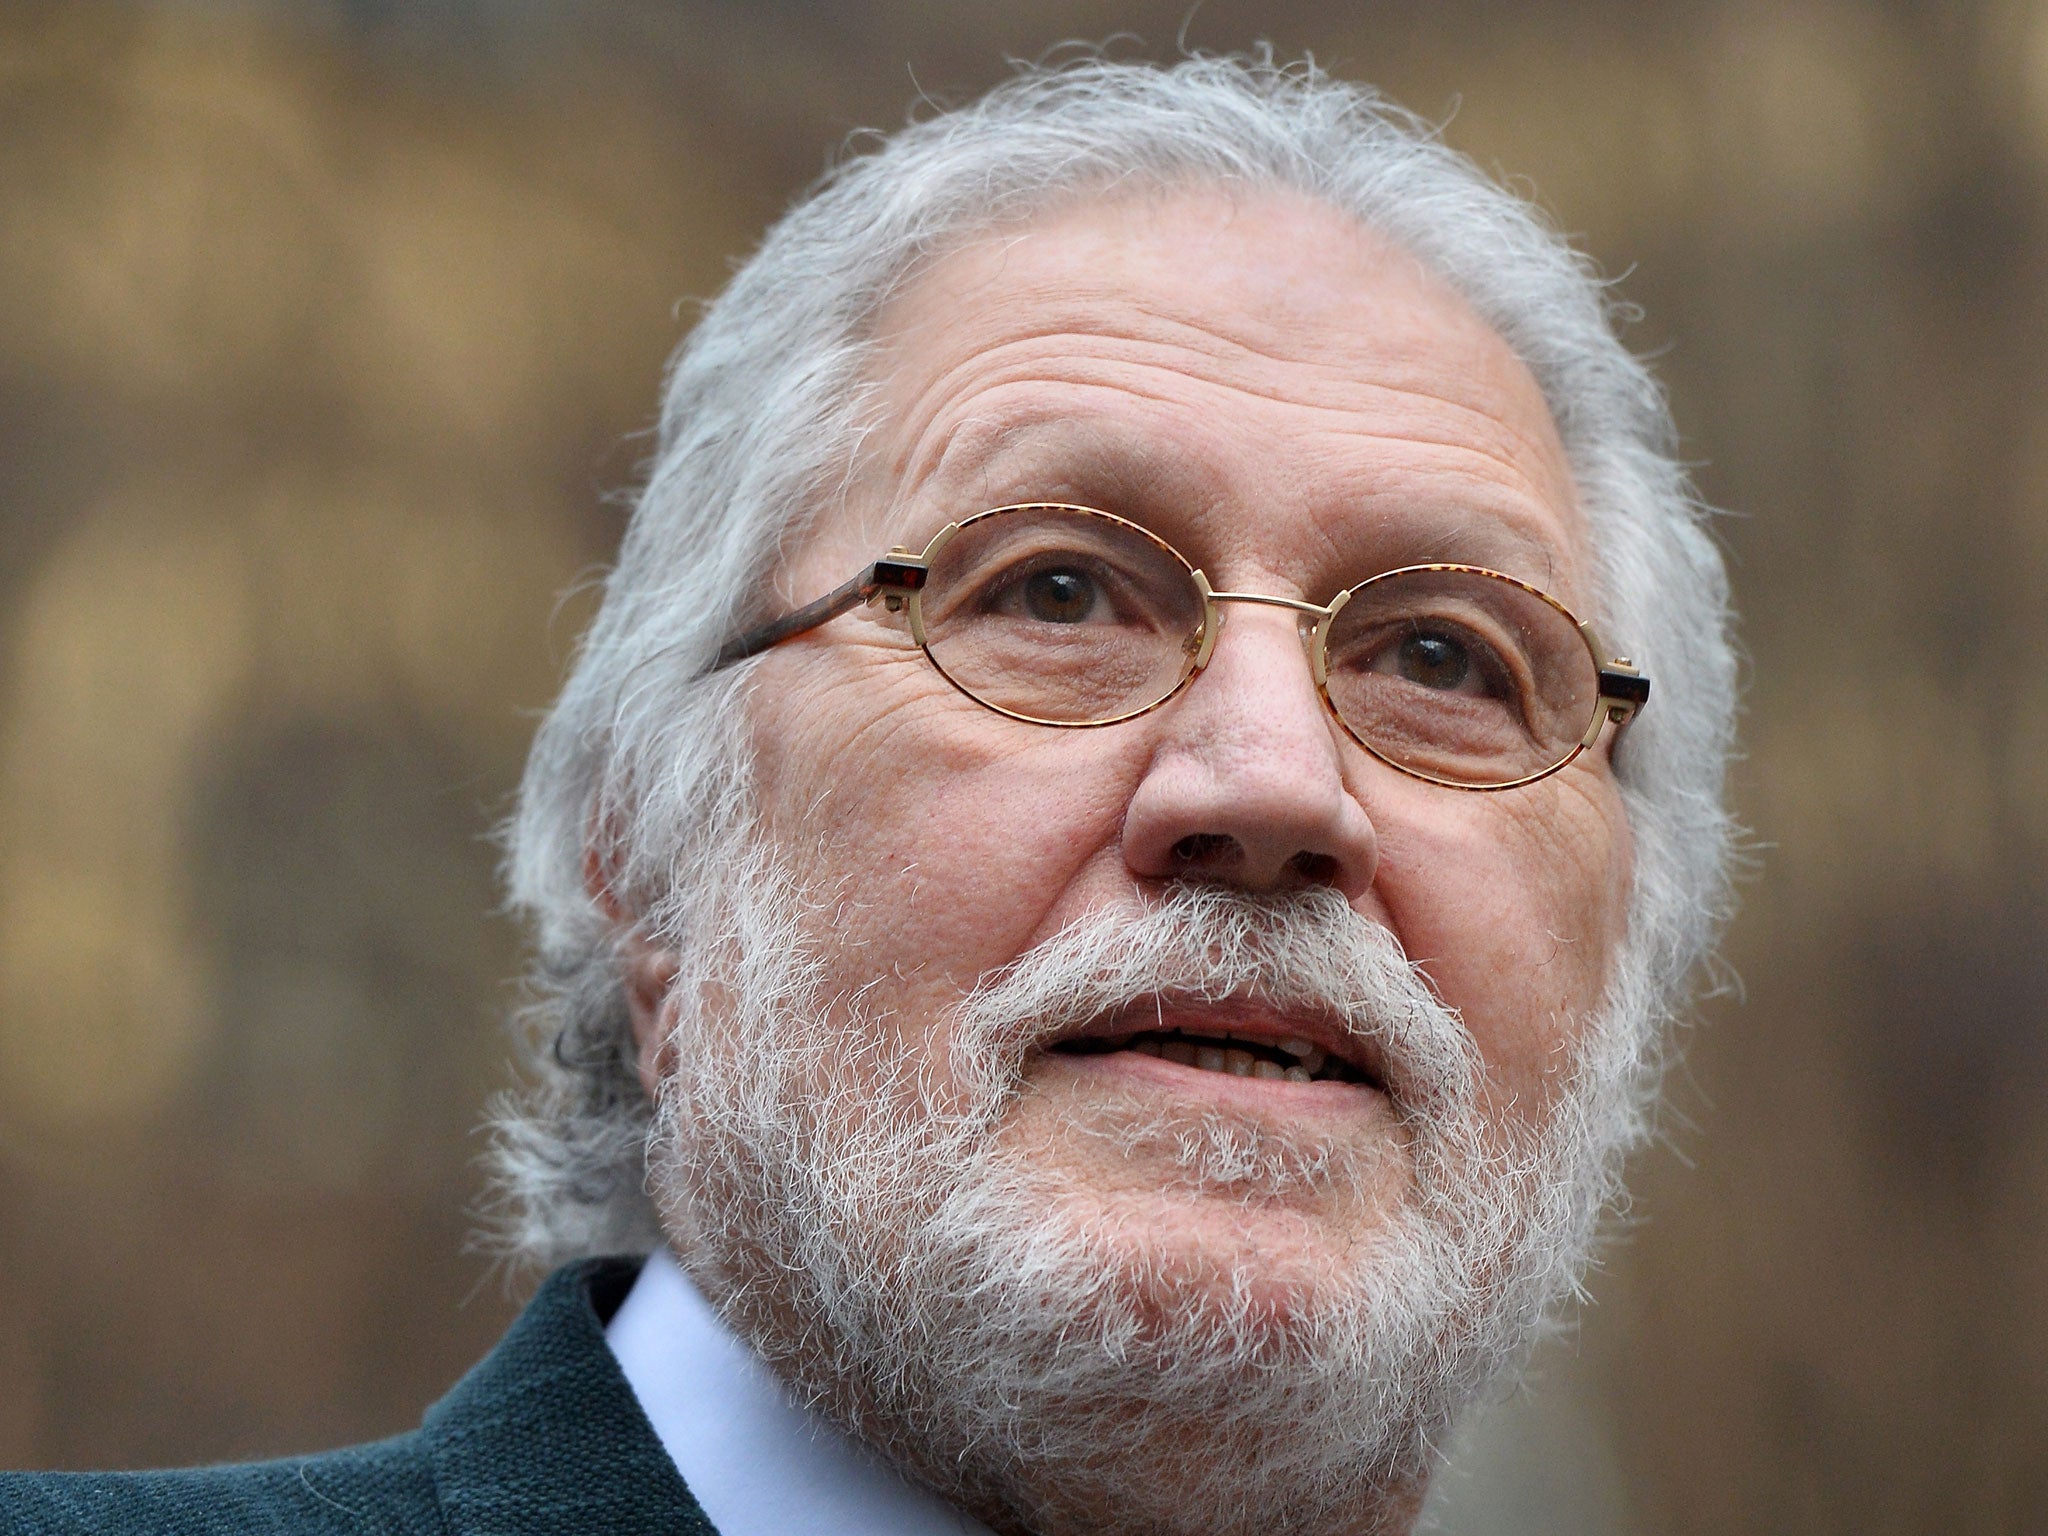 Former radio and TV presenter Dave Lee Travis, real name David Patrick Griffin, arrives at Southwark Crown Court in London for his trial in which he is charged with sexually assaulting 11 women in alleged offences spanning three decades.